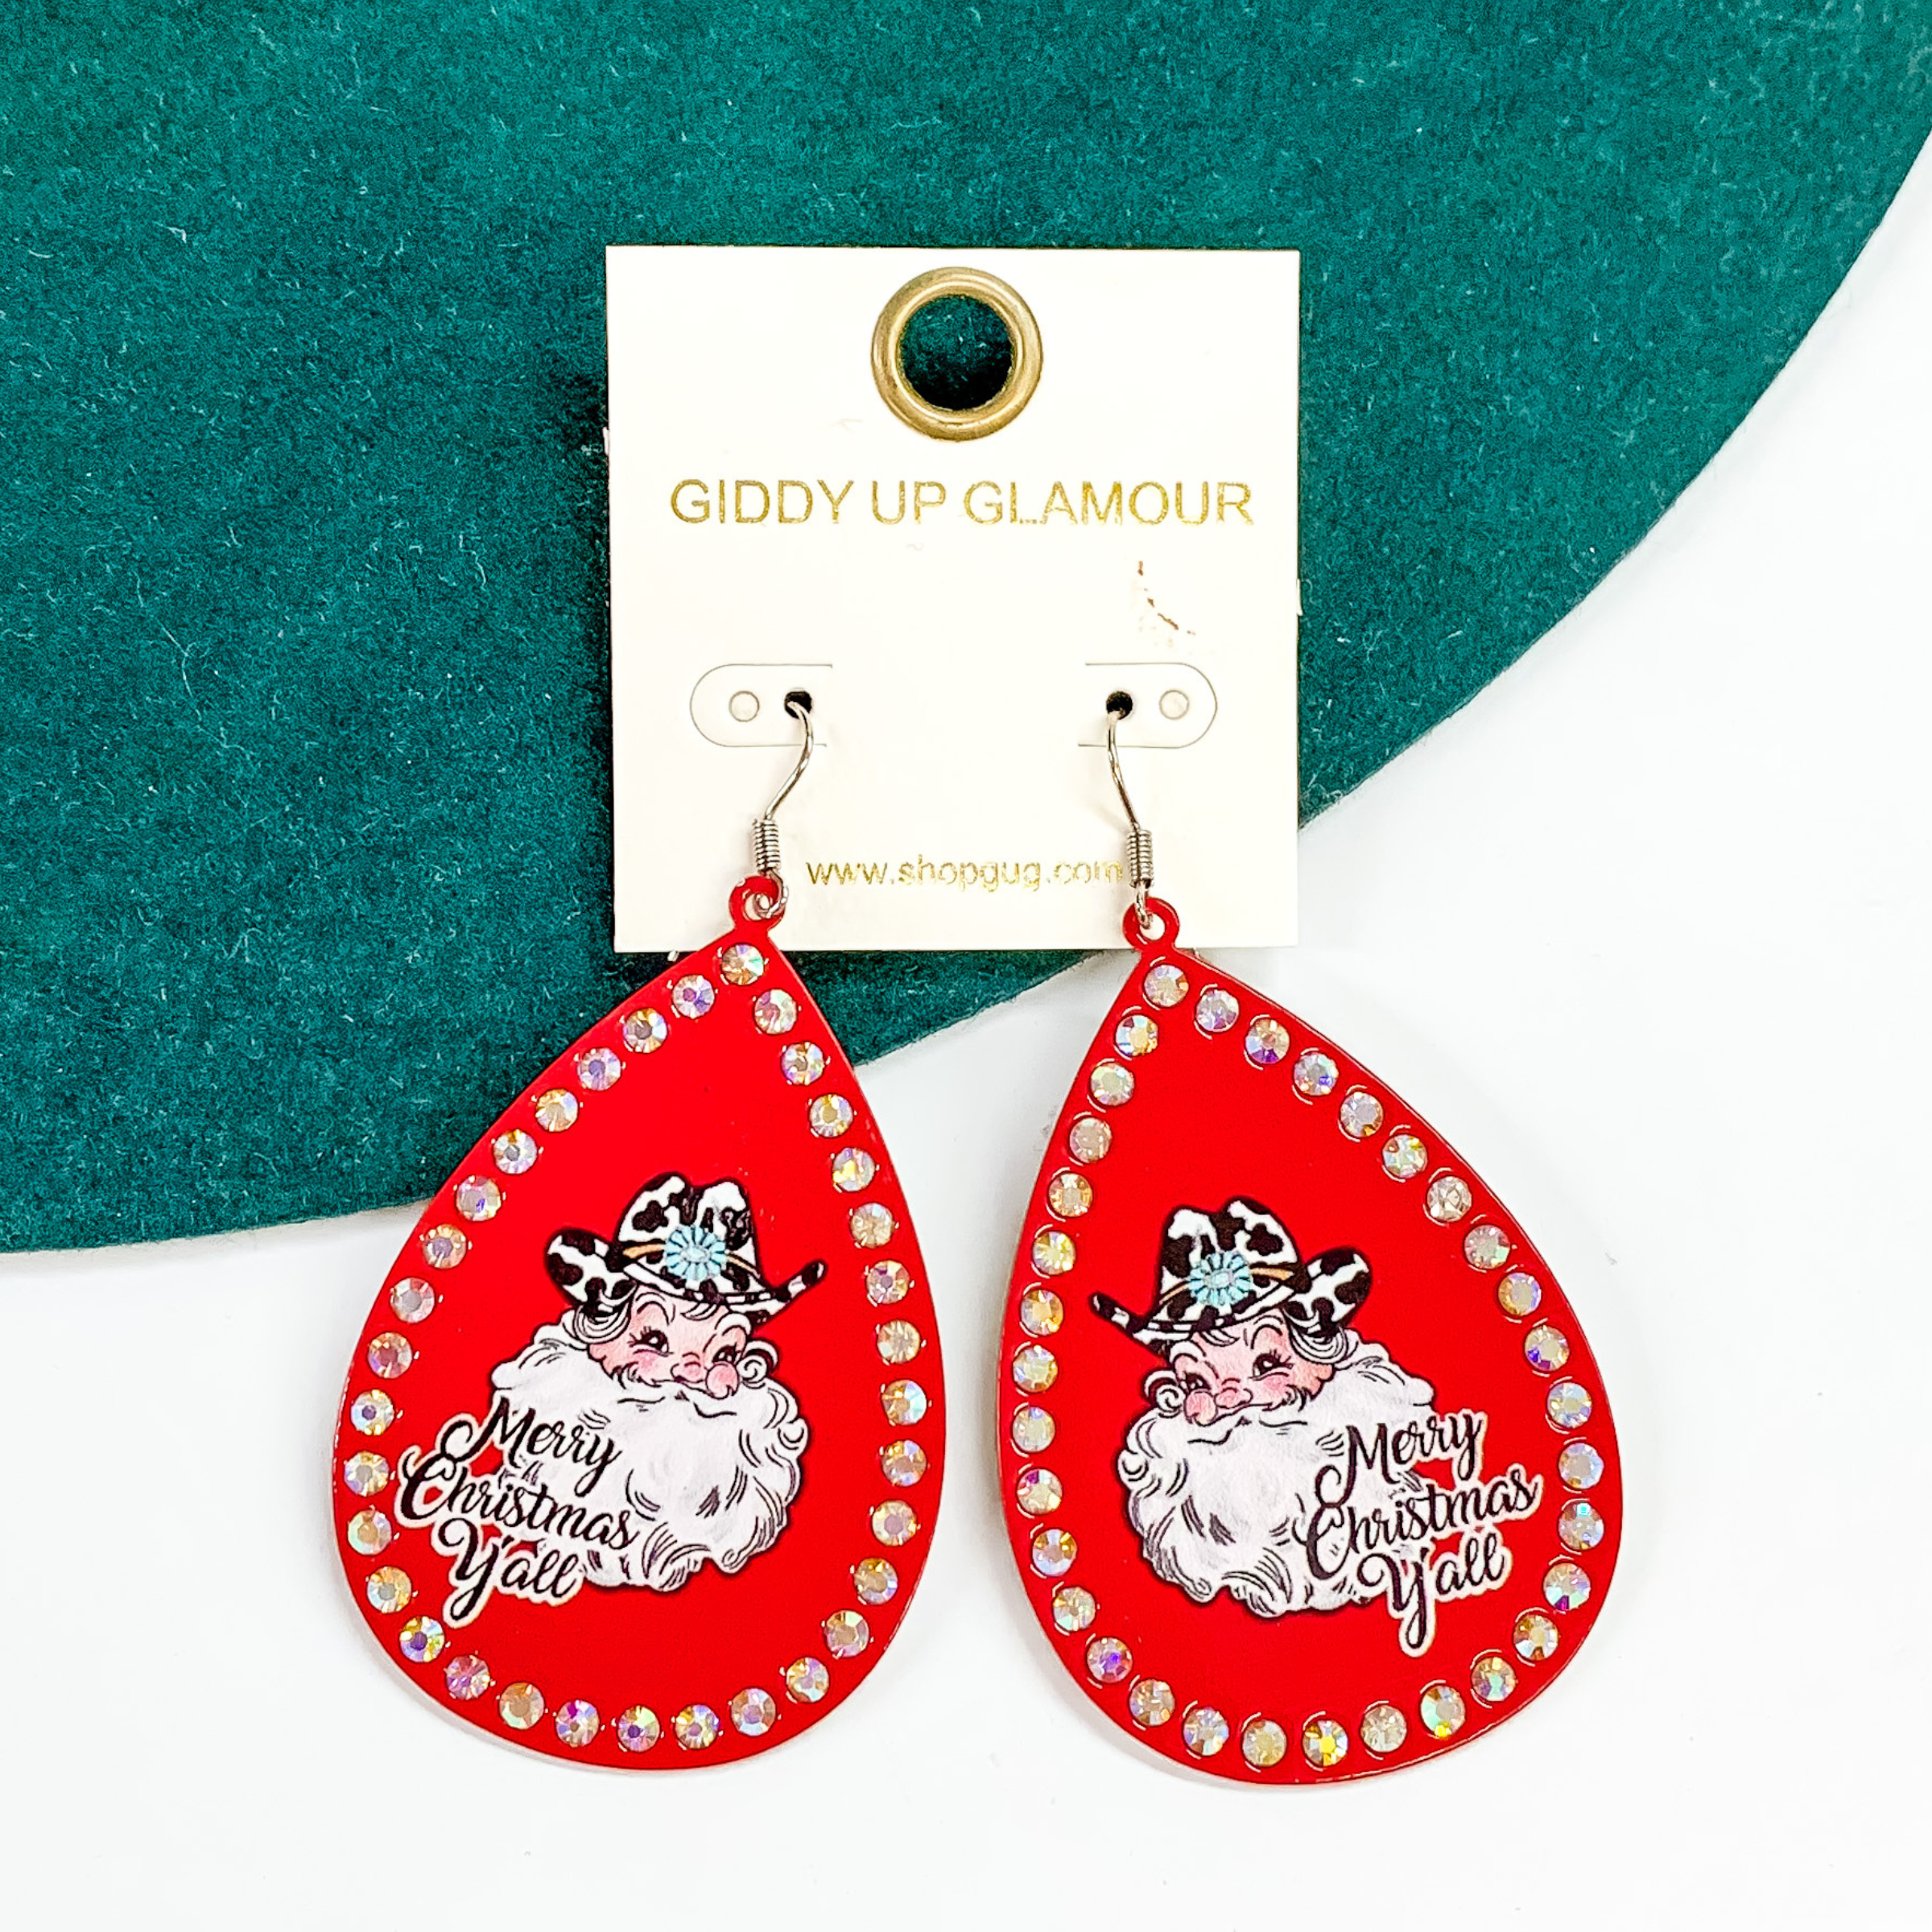 Teardrop dangle earrings with a red design with an AB crystal outline. These earrings also include a printed Santa in the middle with a white and black cow print hat that has a concho belt. The words "Merry Christmas Y'all" is under the Santa head. These earrings are pictured partially laying on a green felt hat on a white background.